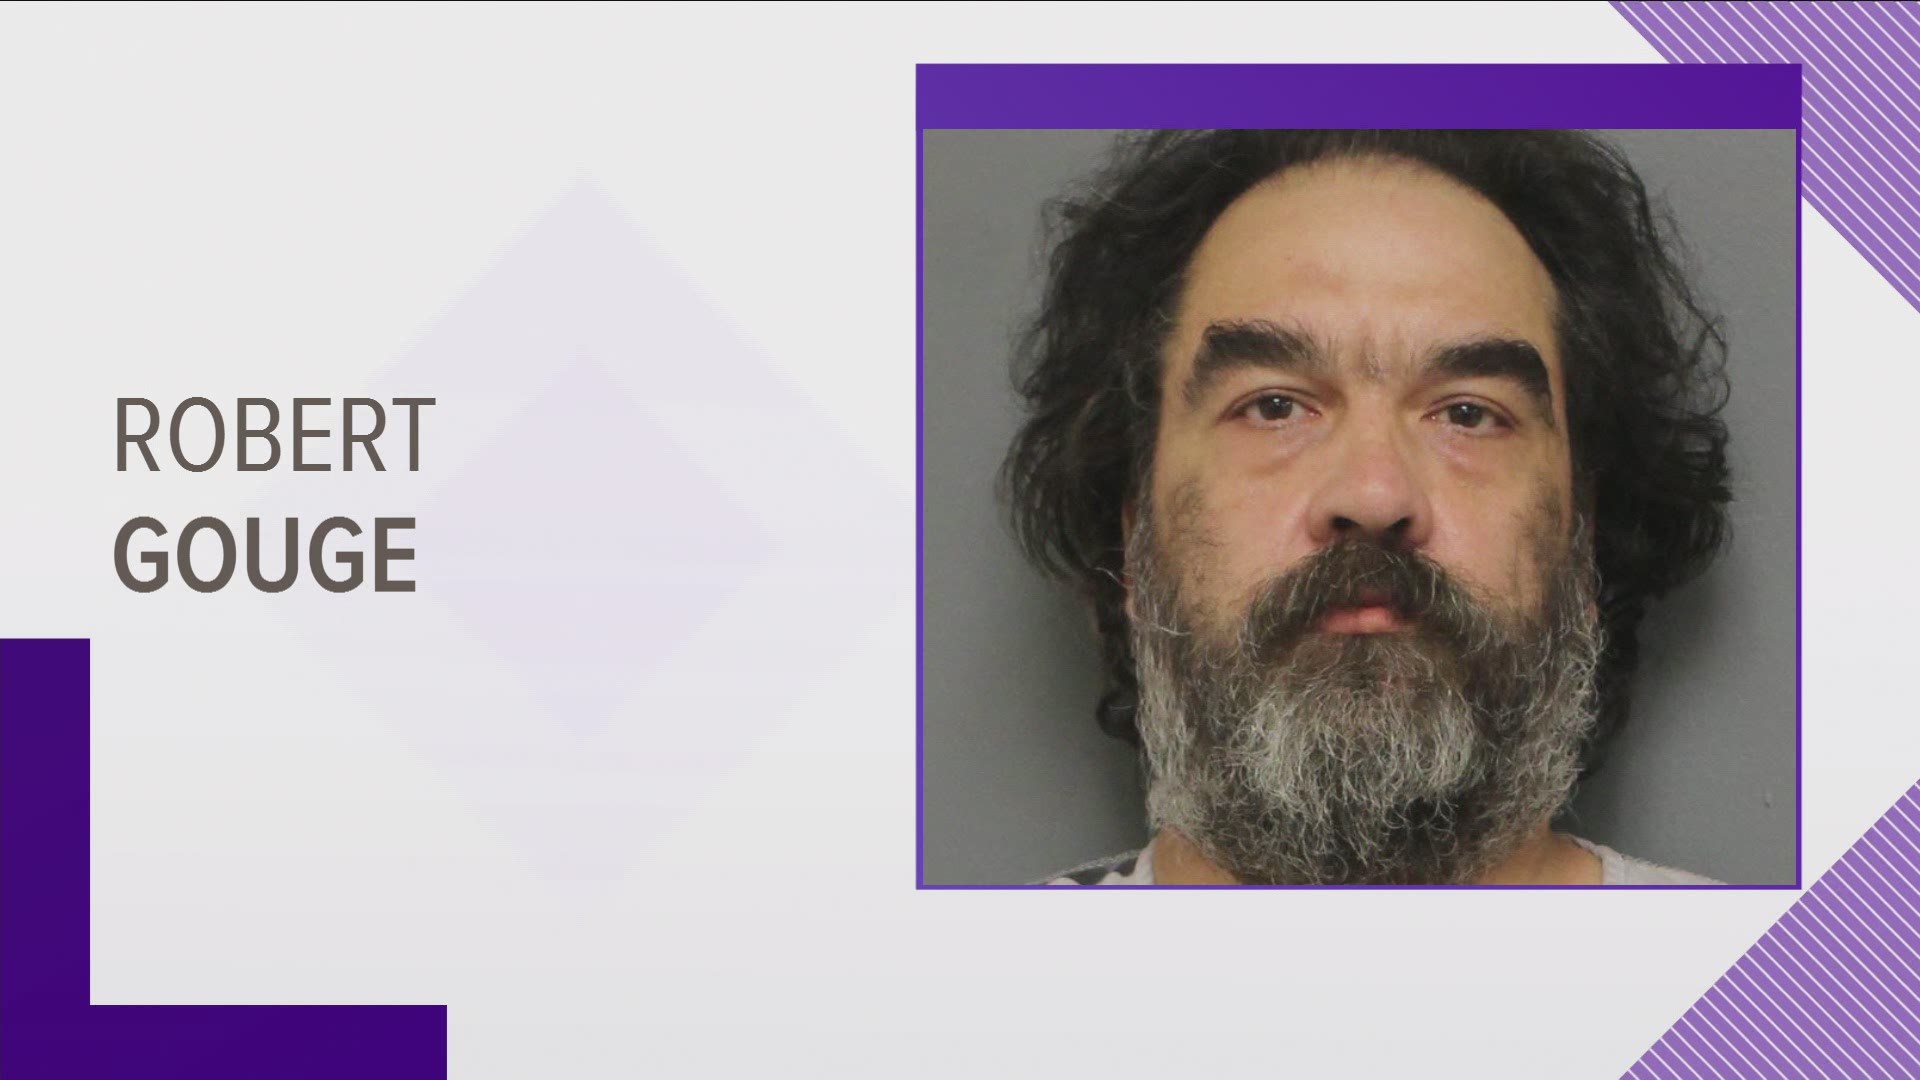 The Knox County District Attorney said a Knoxville man faces more than 25 years in prison after raping a child.